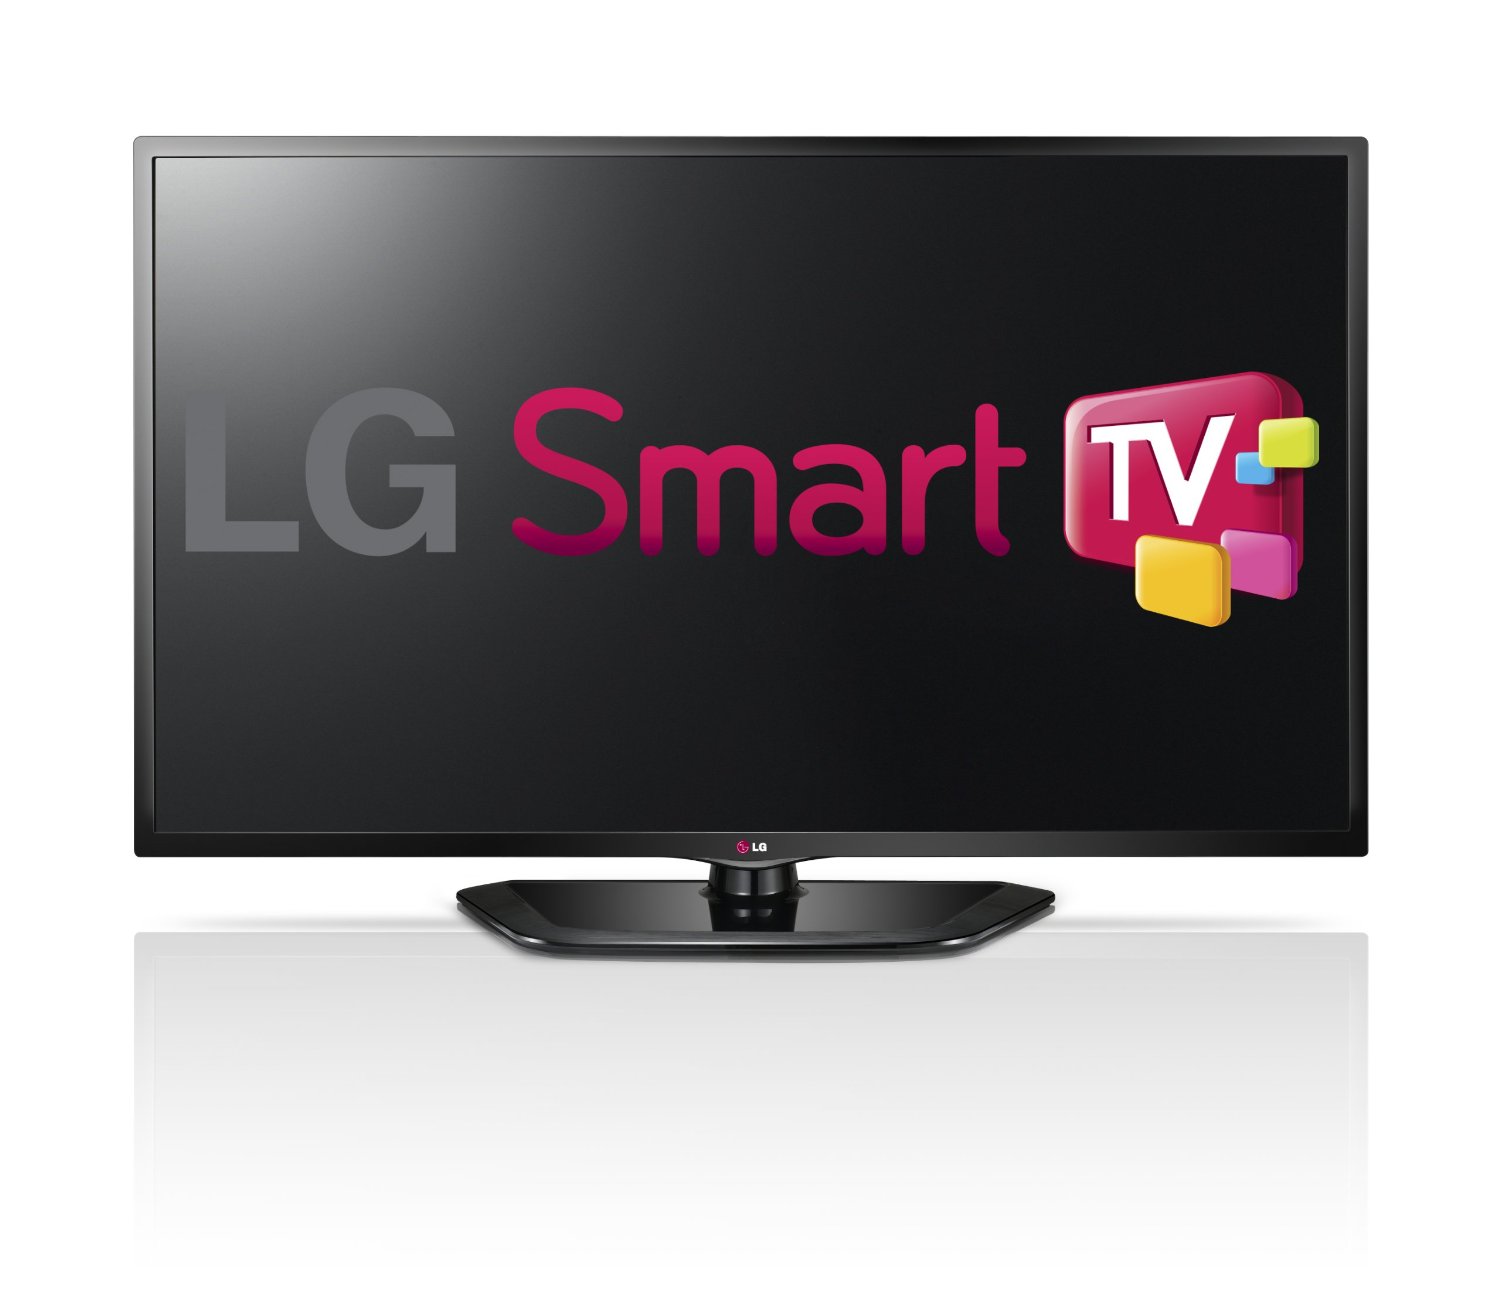 LG 42LN5700 Review & Best Price
